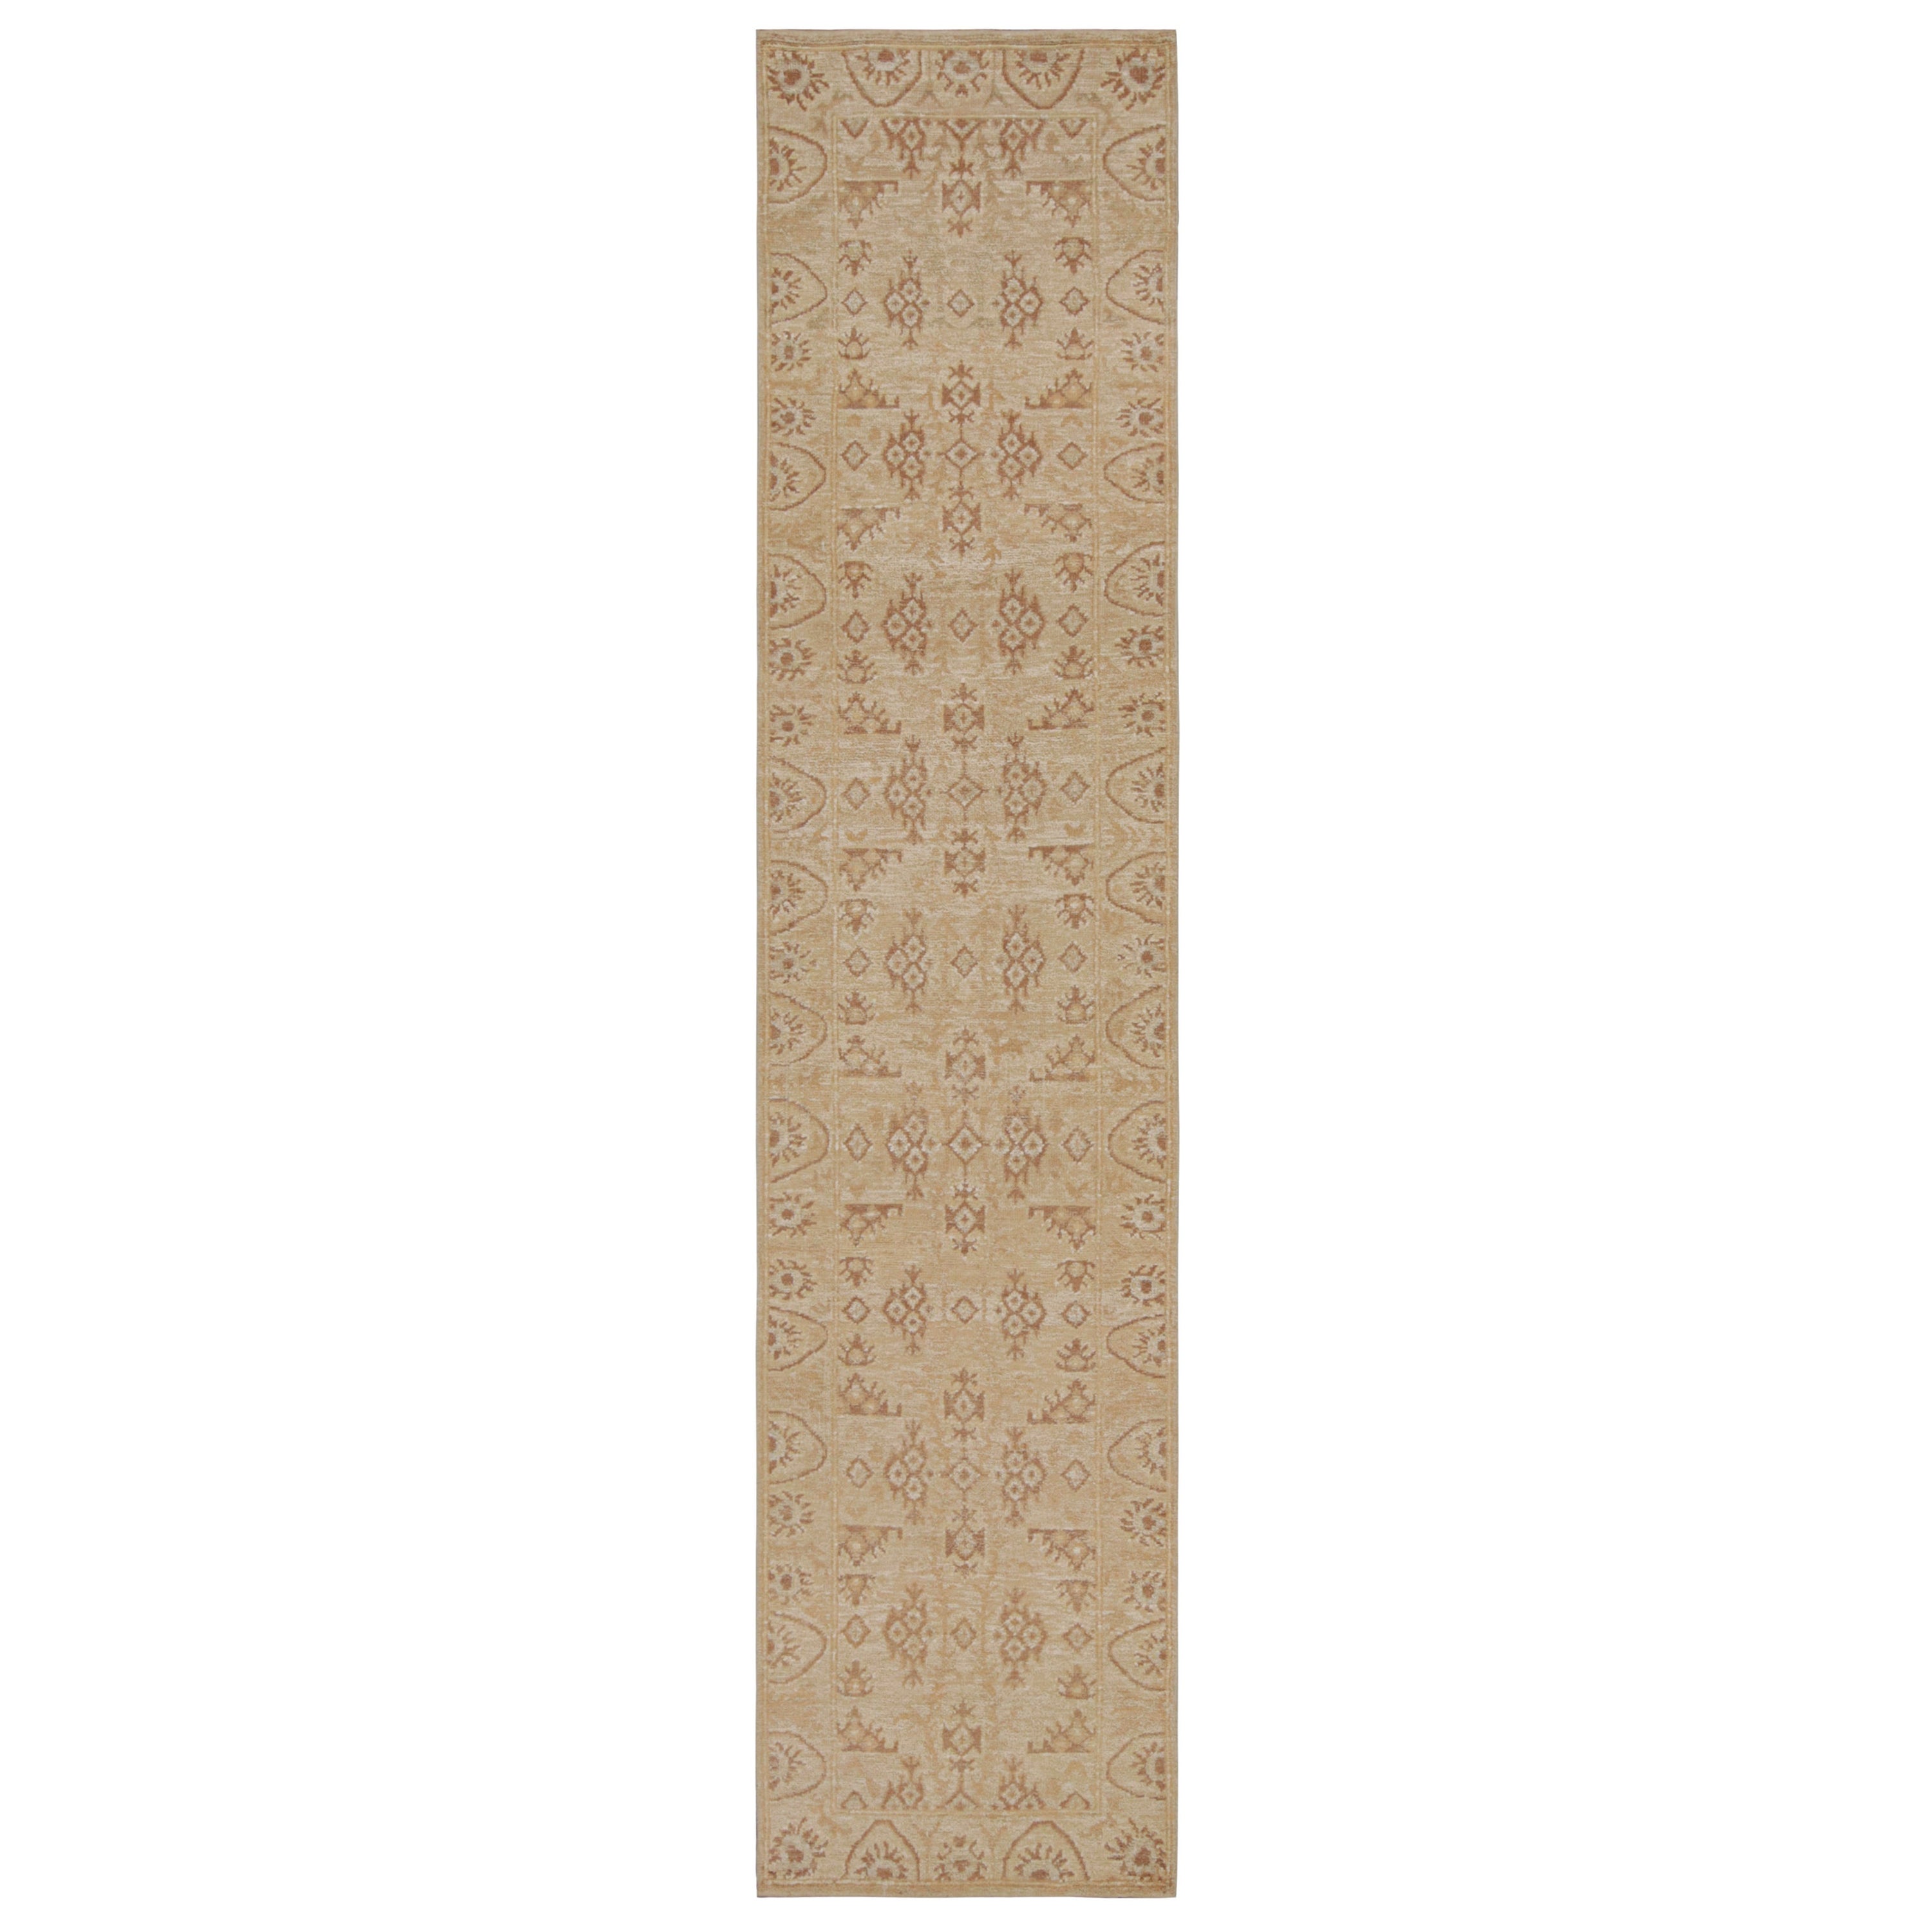 Rug & Kilim’s Oushak Style Rug in Beige-Brown Floral Pattern For Sale